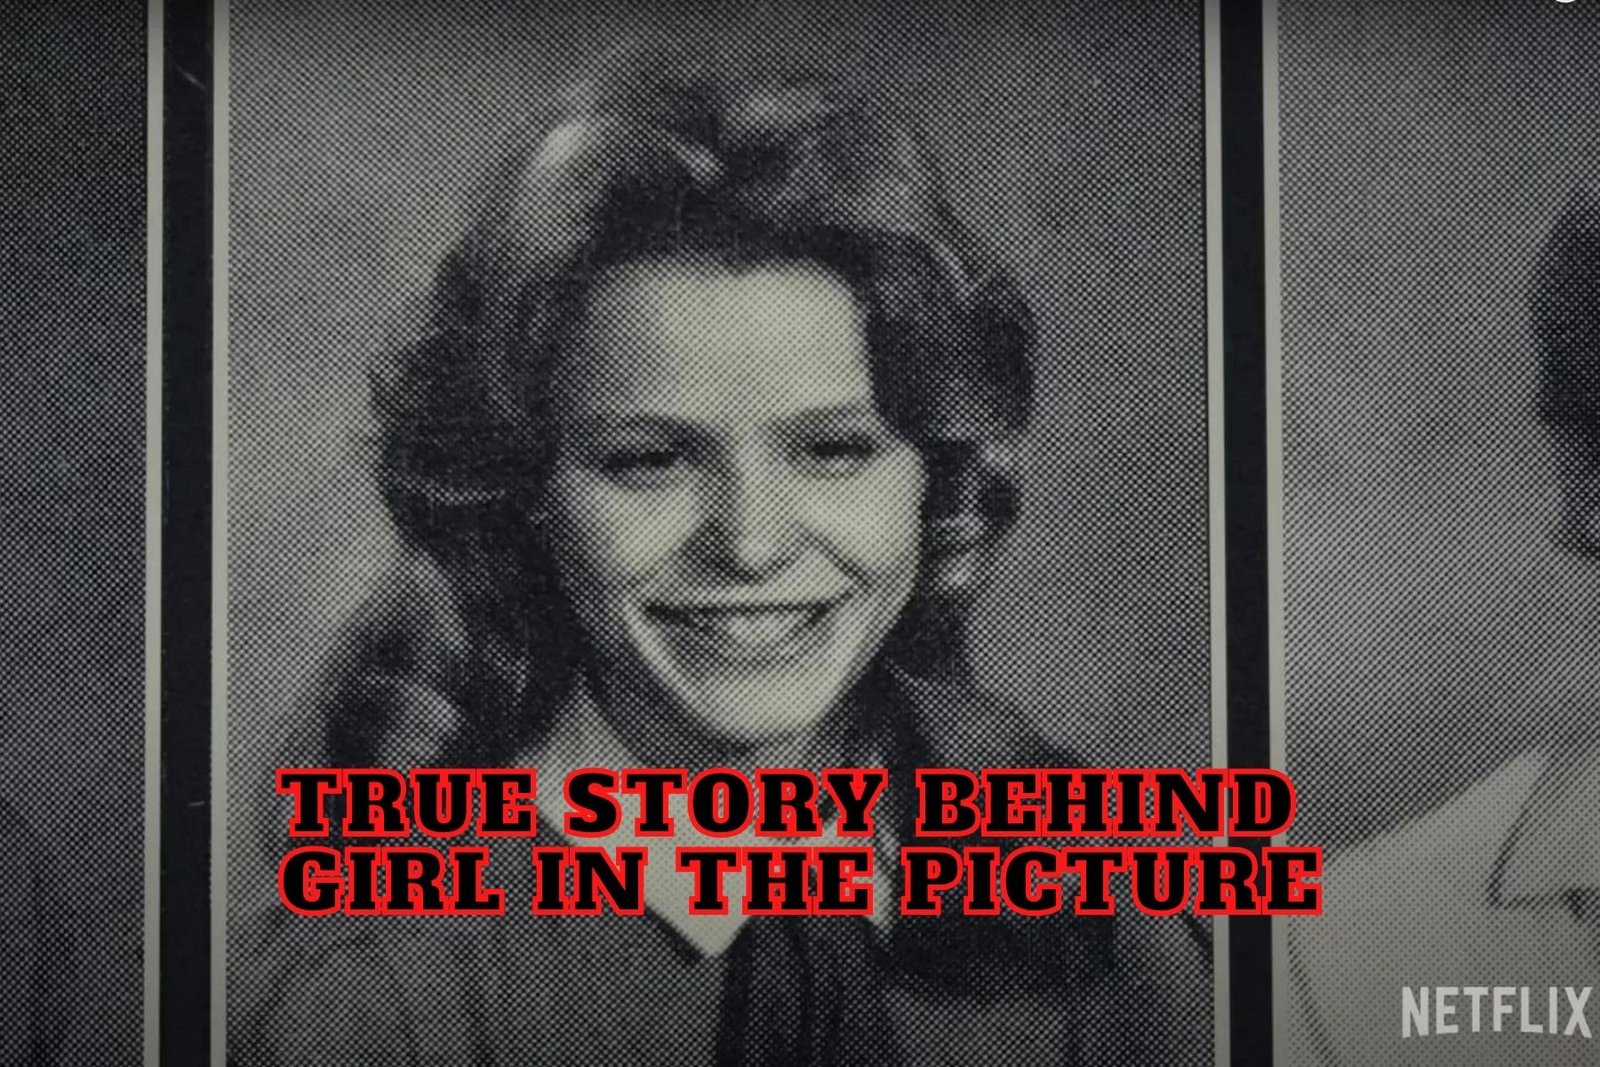 True Story Behind Girl in the Picture - Did Netflix Tell the Truth?